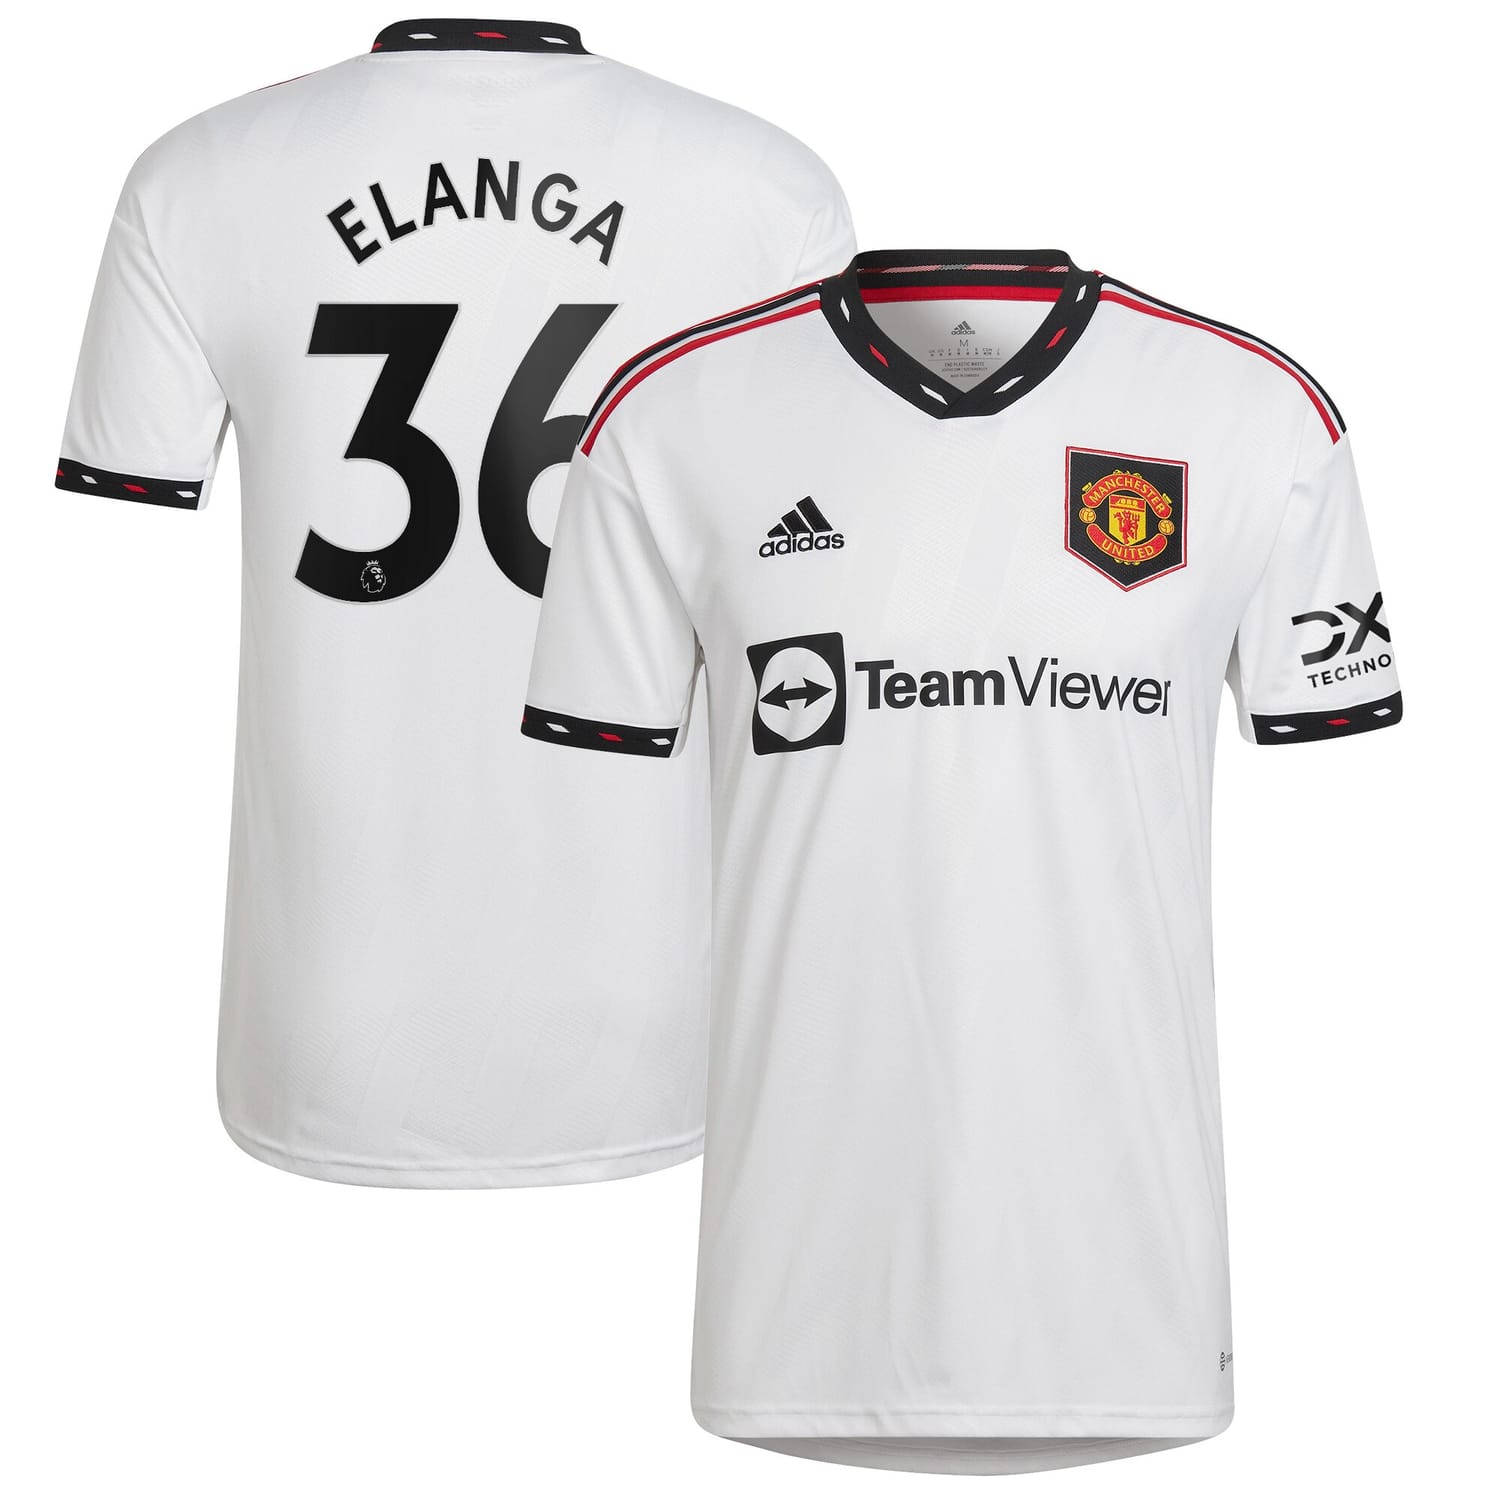 Premier League Manchester United Away Jersey Shirt 2022-23 player Anthony Elanga 36 printing for Men